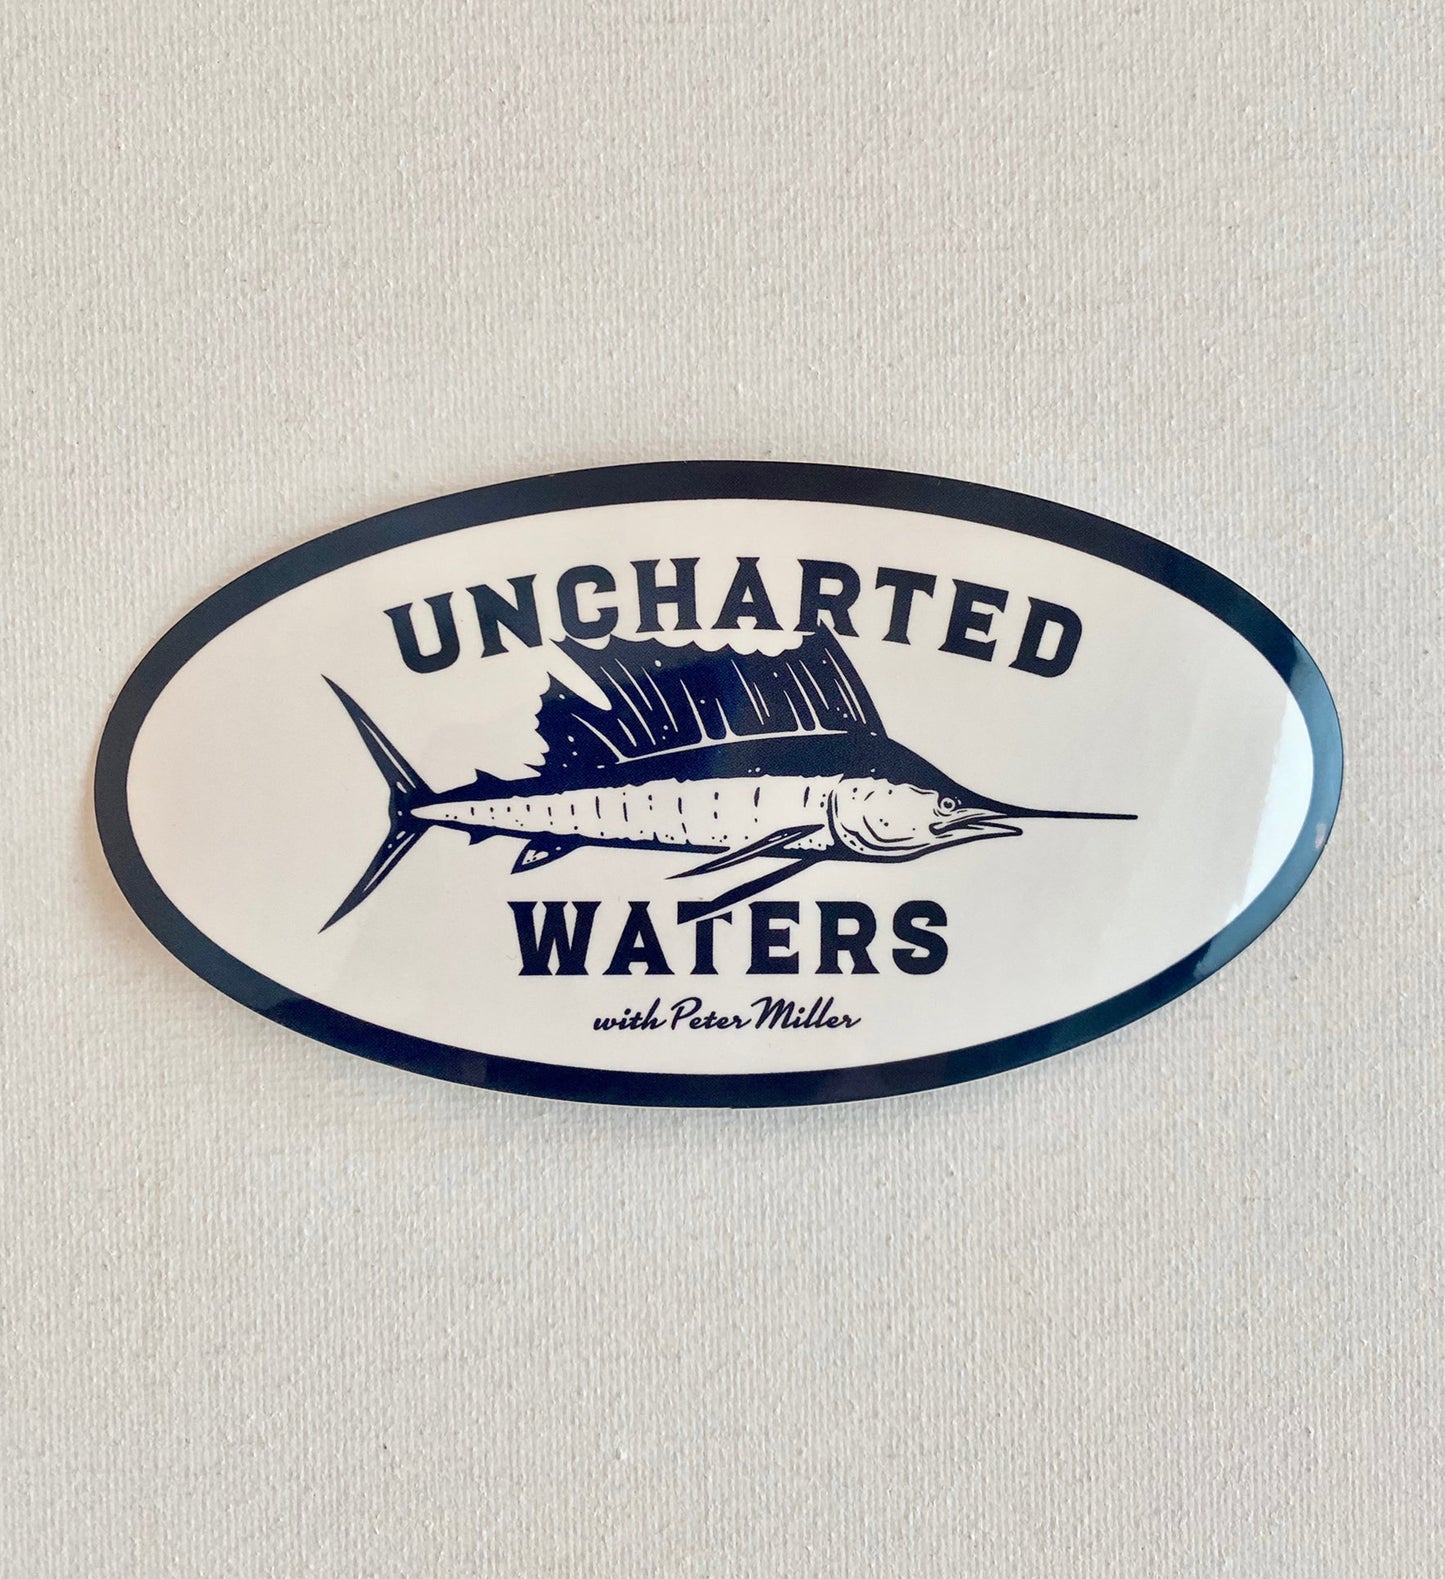 Uncharted Waters Oval Leather Patch White Trucker Cap - Snapback